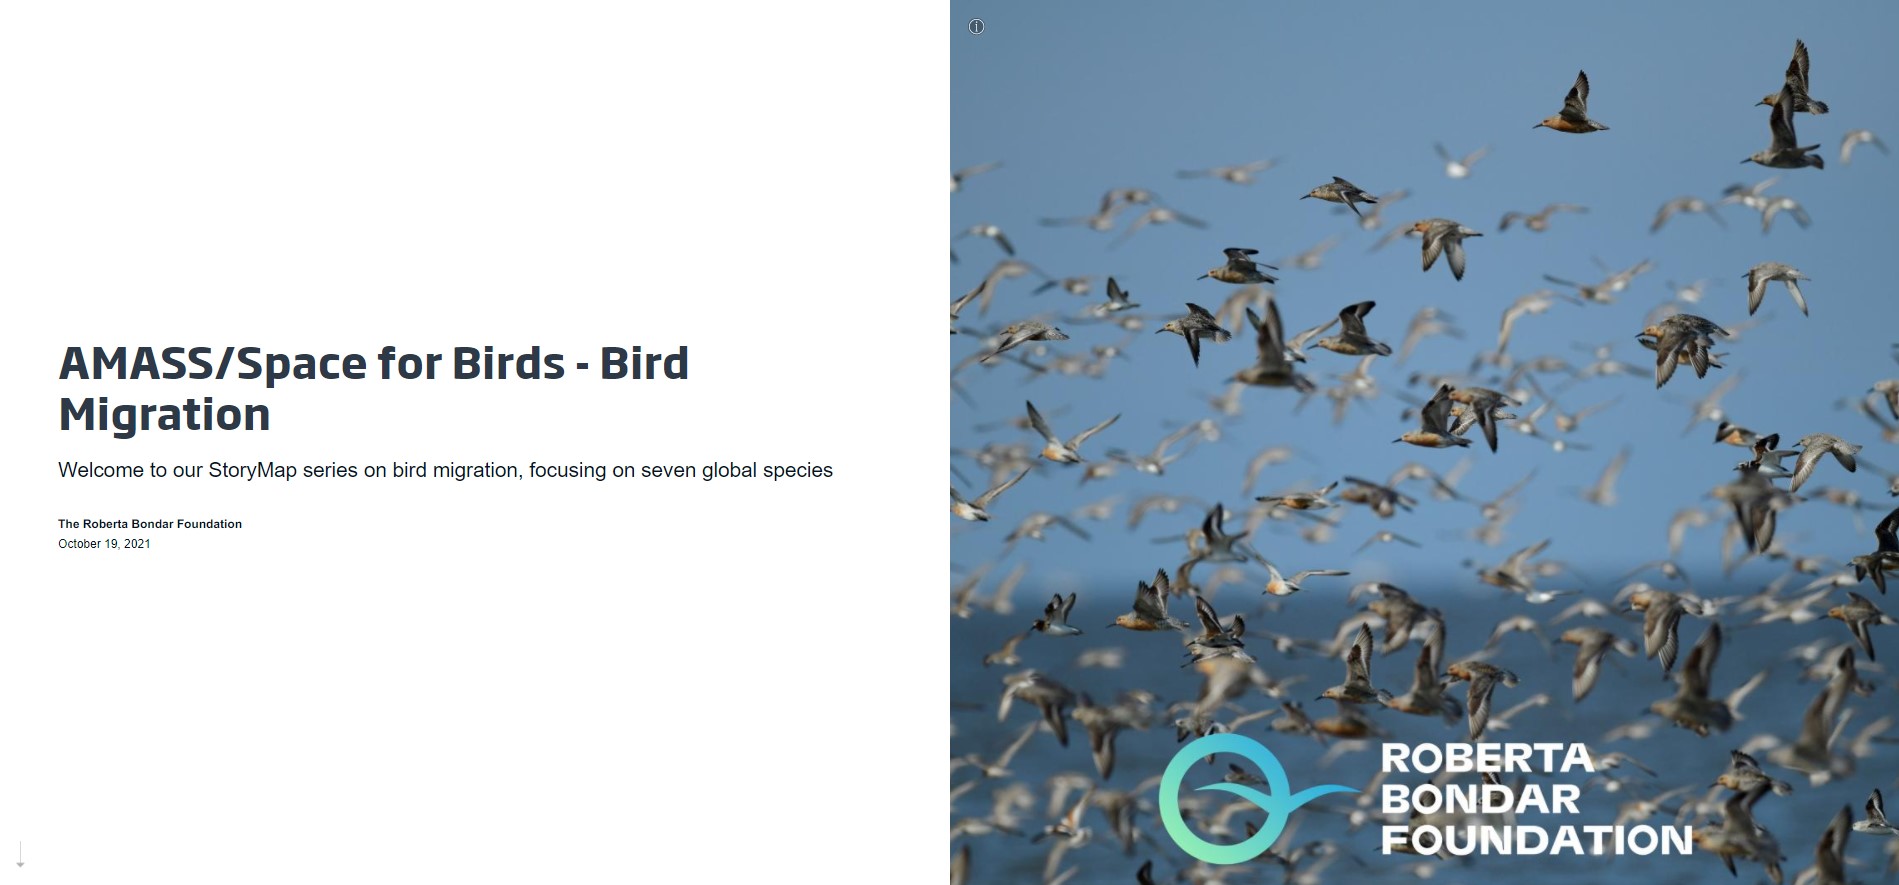 Slide with the text AMASS/Space for Birds - Bird Migration and an image of Red Knots flying against blue sky